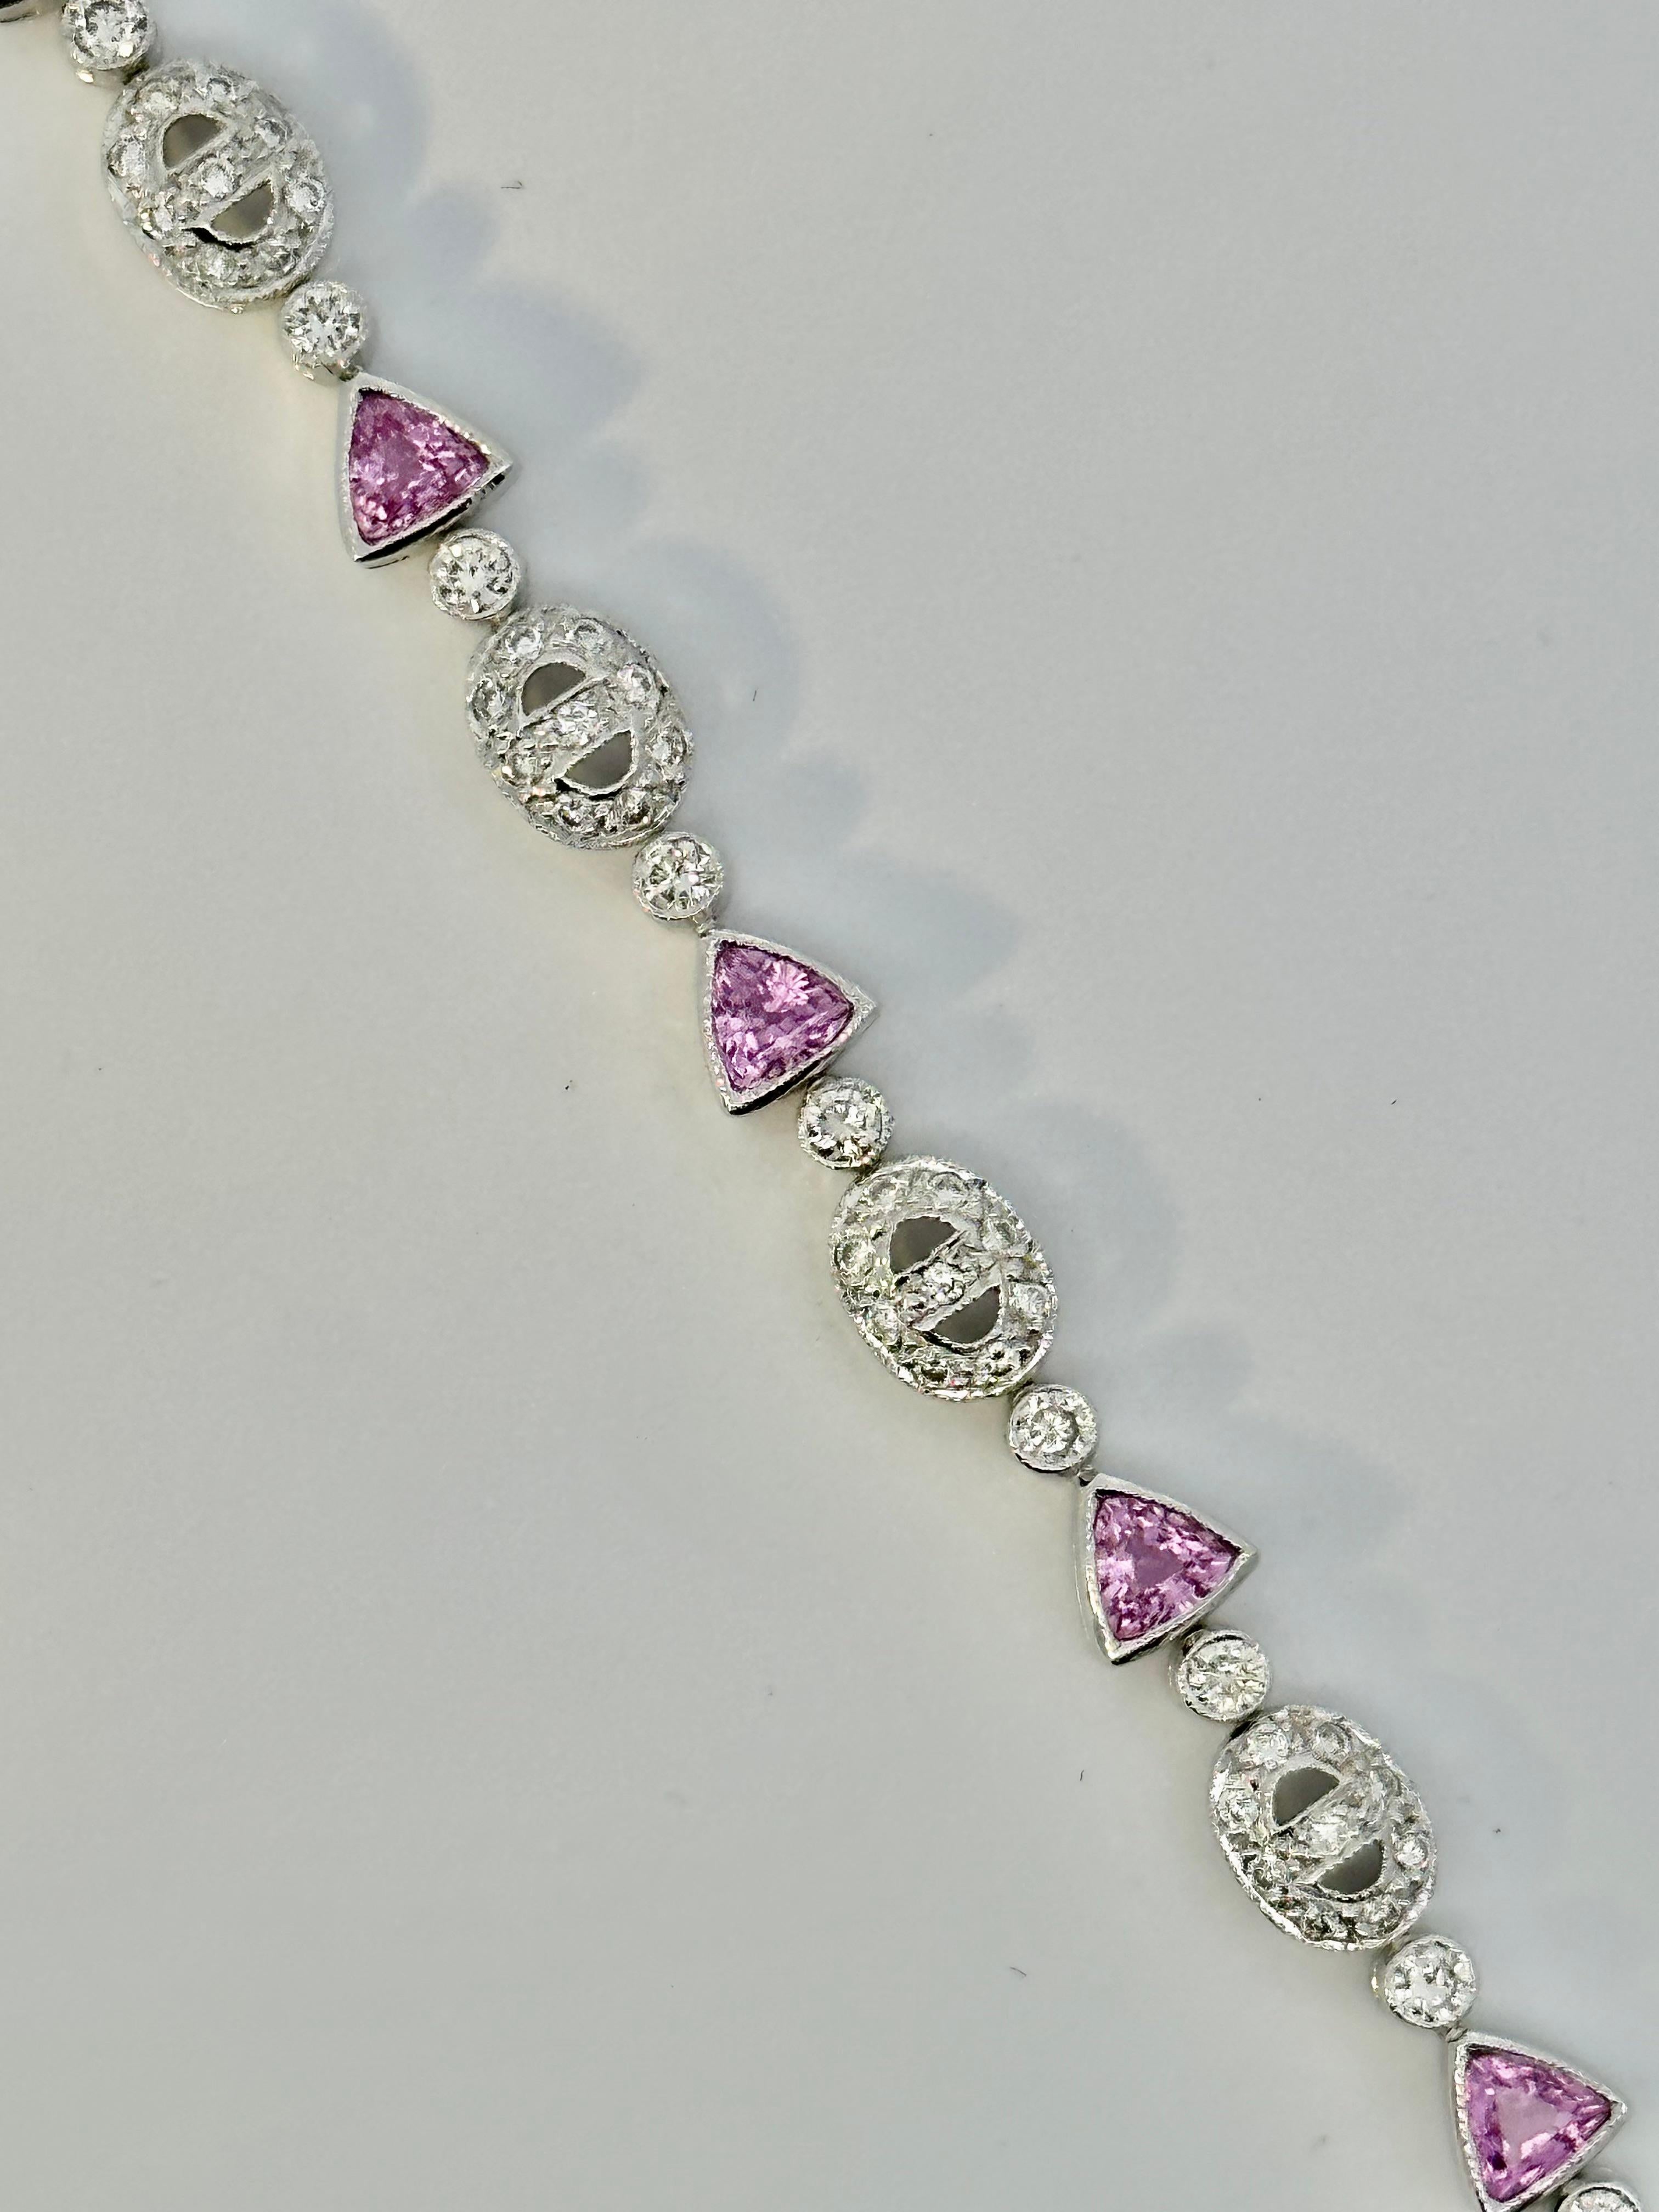 One 18kt white gold bracelet set with trillion cut natural pink sapphires and brilliant cut diamonds. Perfect for everyday with a little splash of colour. 

11 trillion cut natural pink sapphires weighing 2.75ct total weight

120 brilliant cut